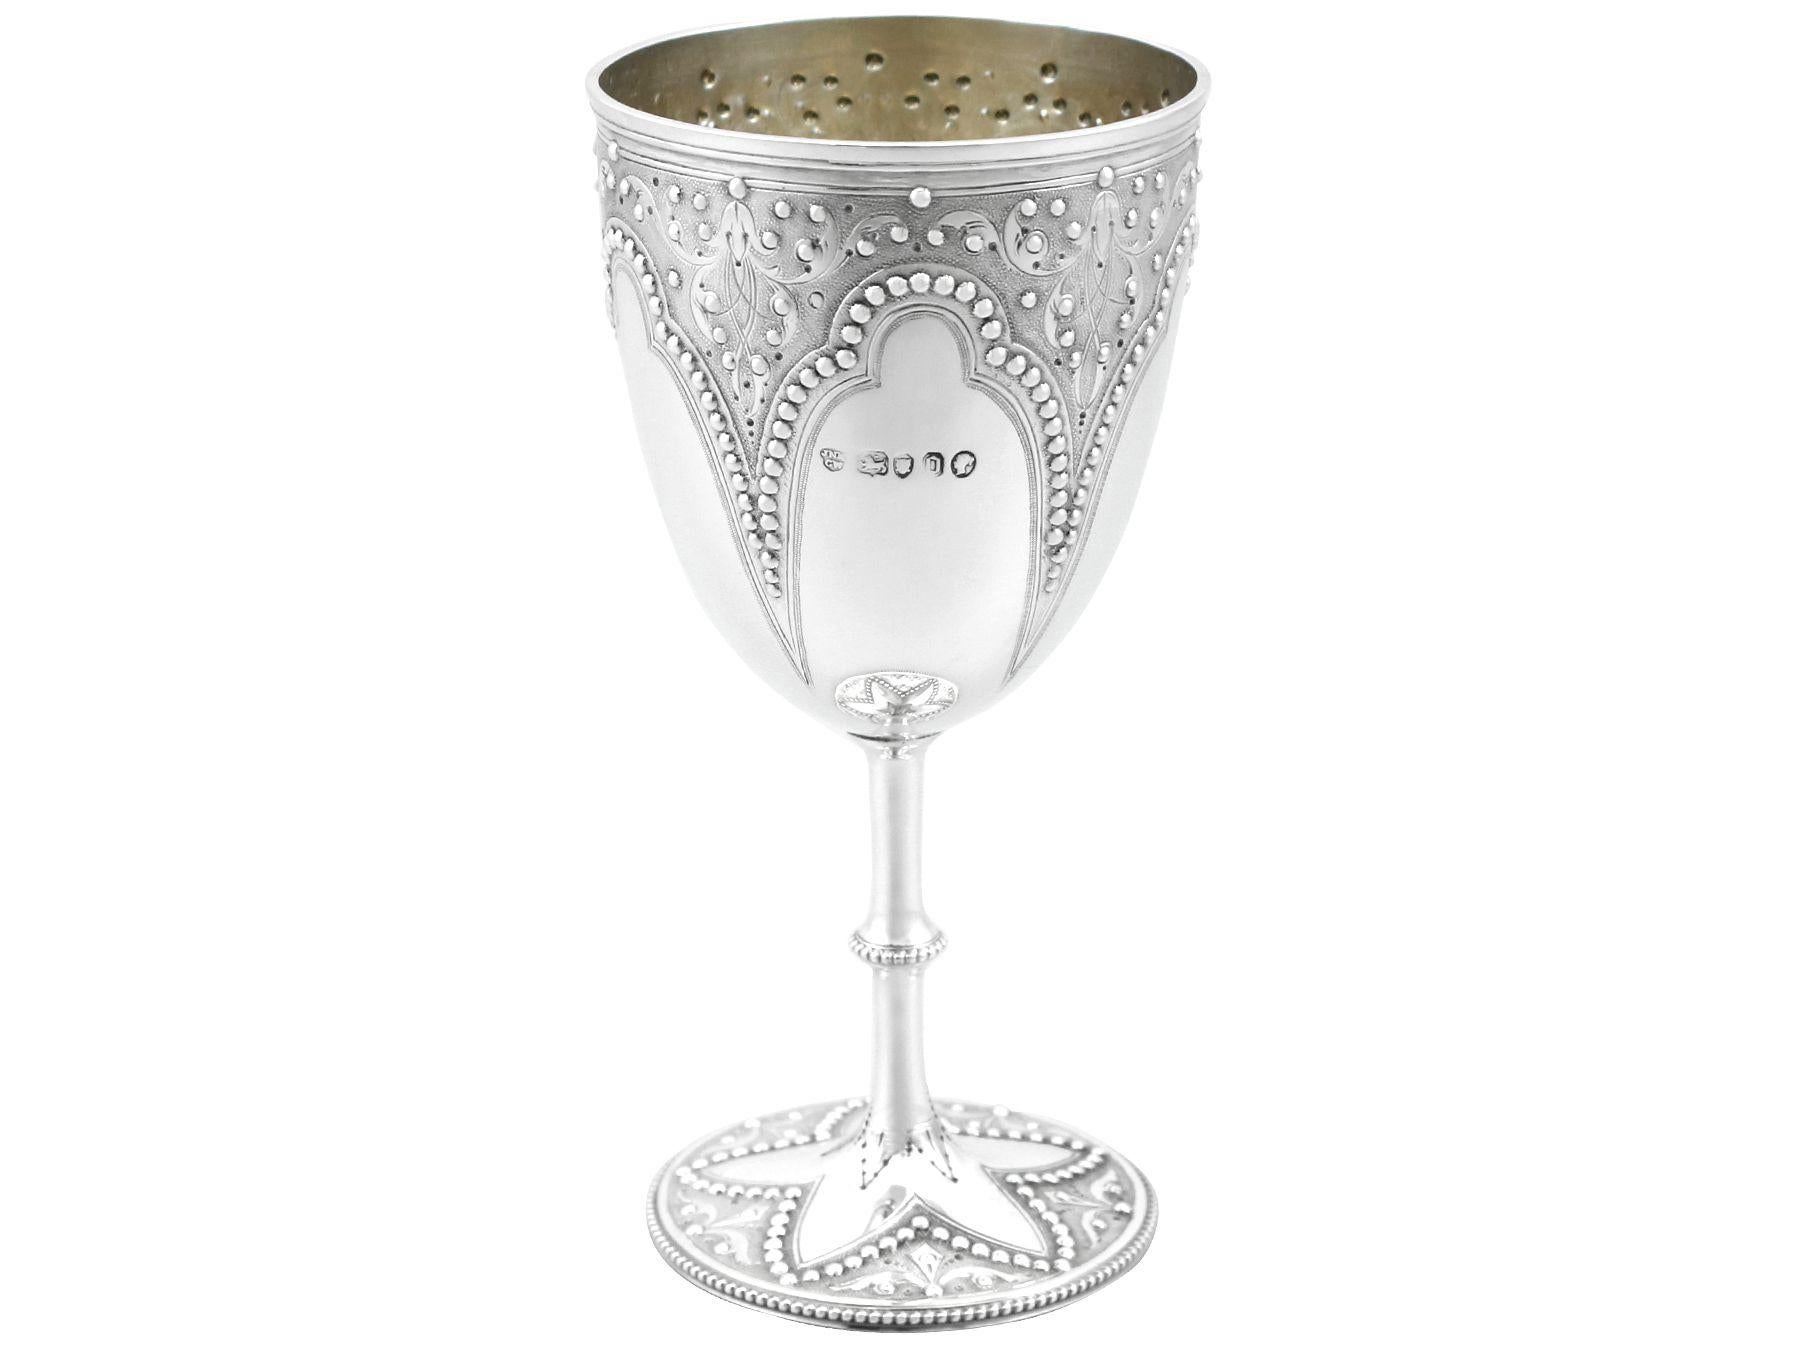 An exceptional, fine and impressive antique Victorian English sterling silver wine goblet; an addition to our antique wine and drinks related silverware collection

This exceptional antique Victorian sterling silver wine goblet has a circular bell